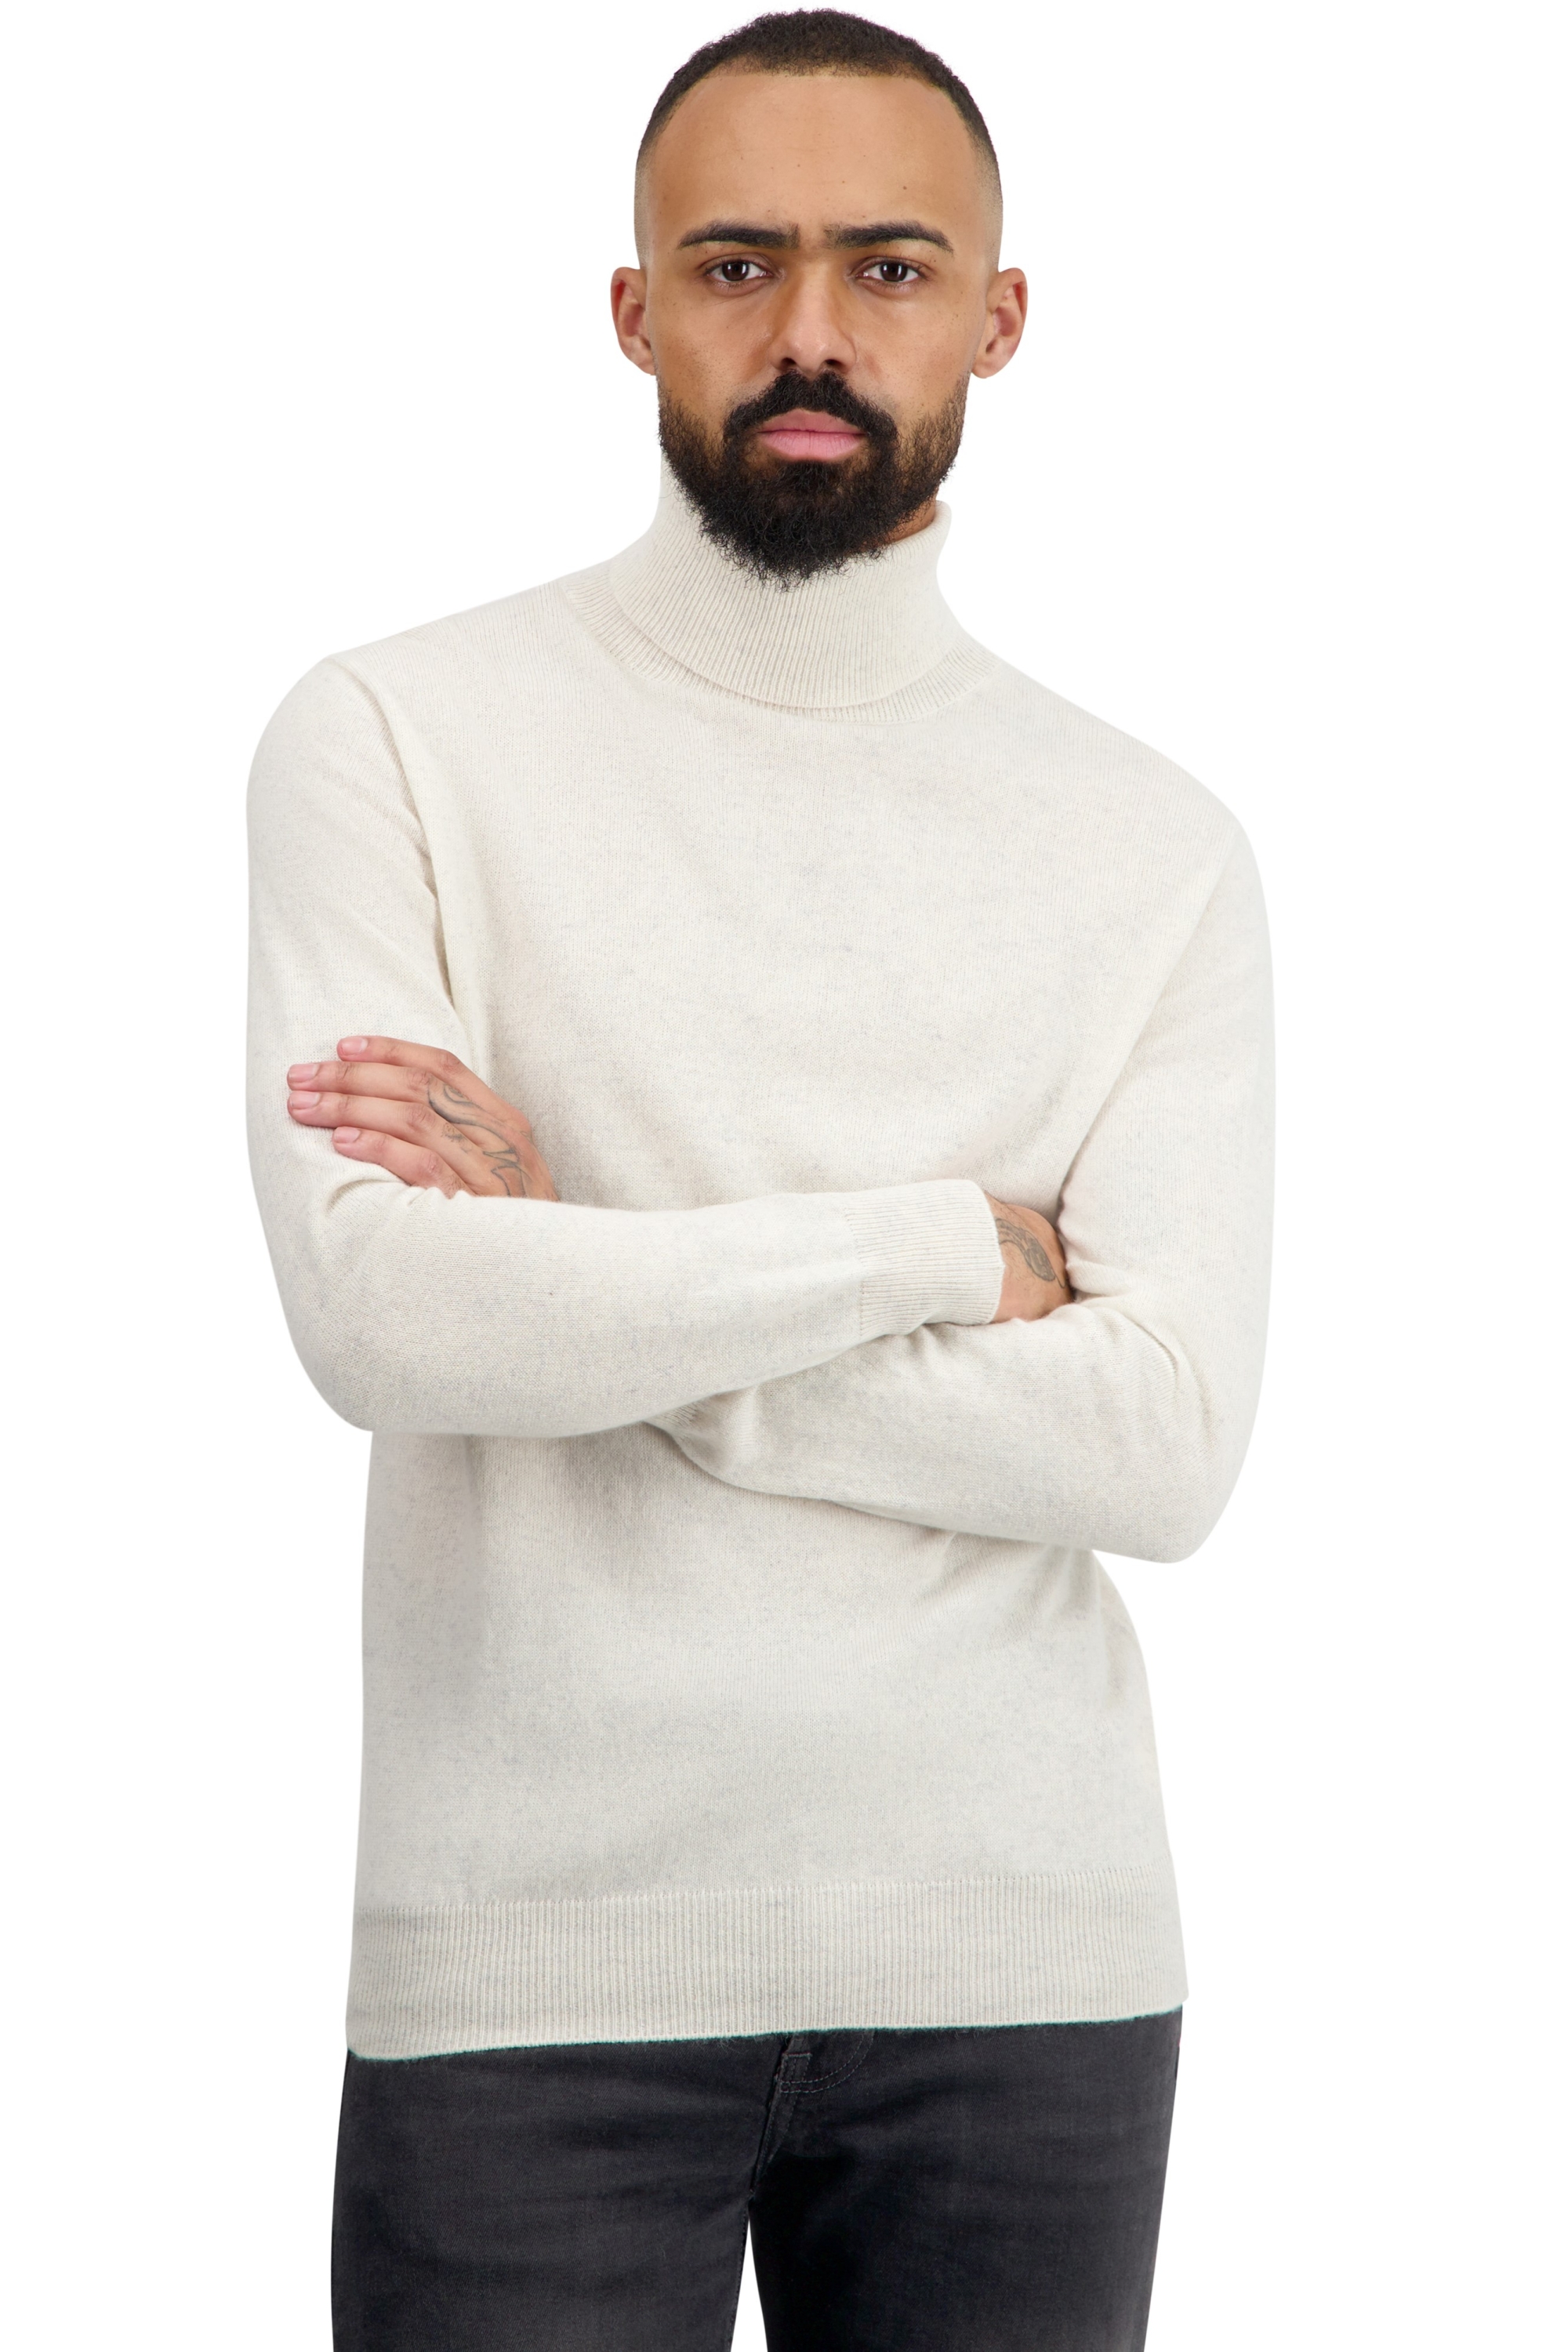 Cashmere men basic sweaters at low prices tarry first phantom s